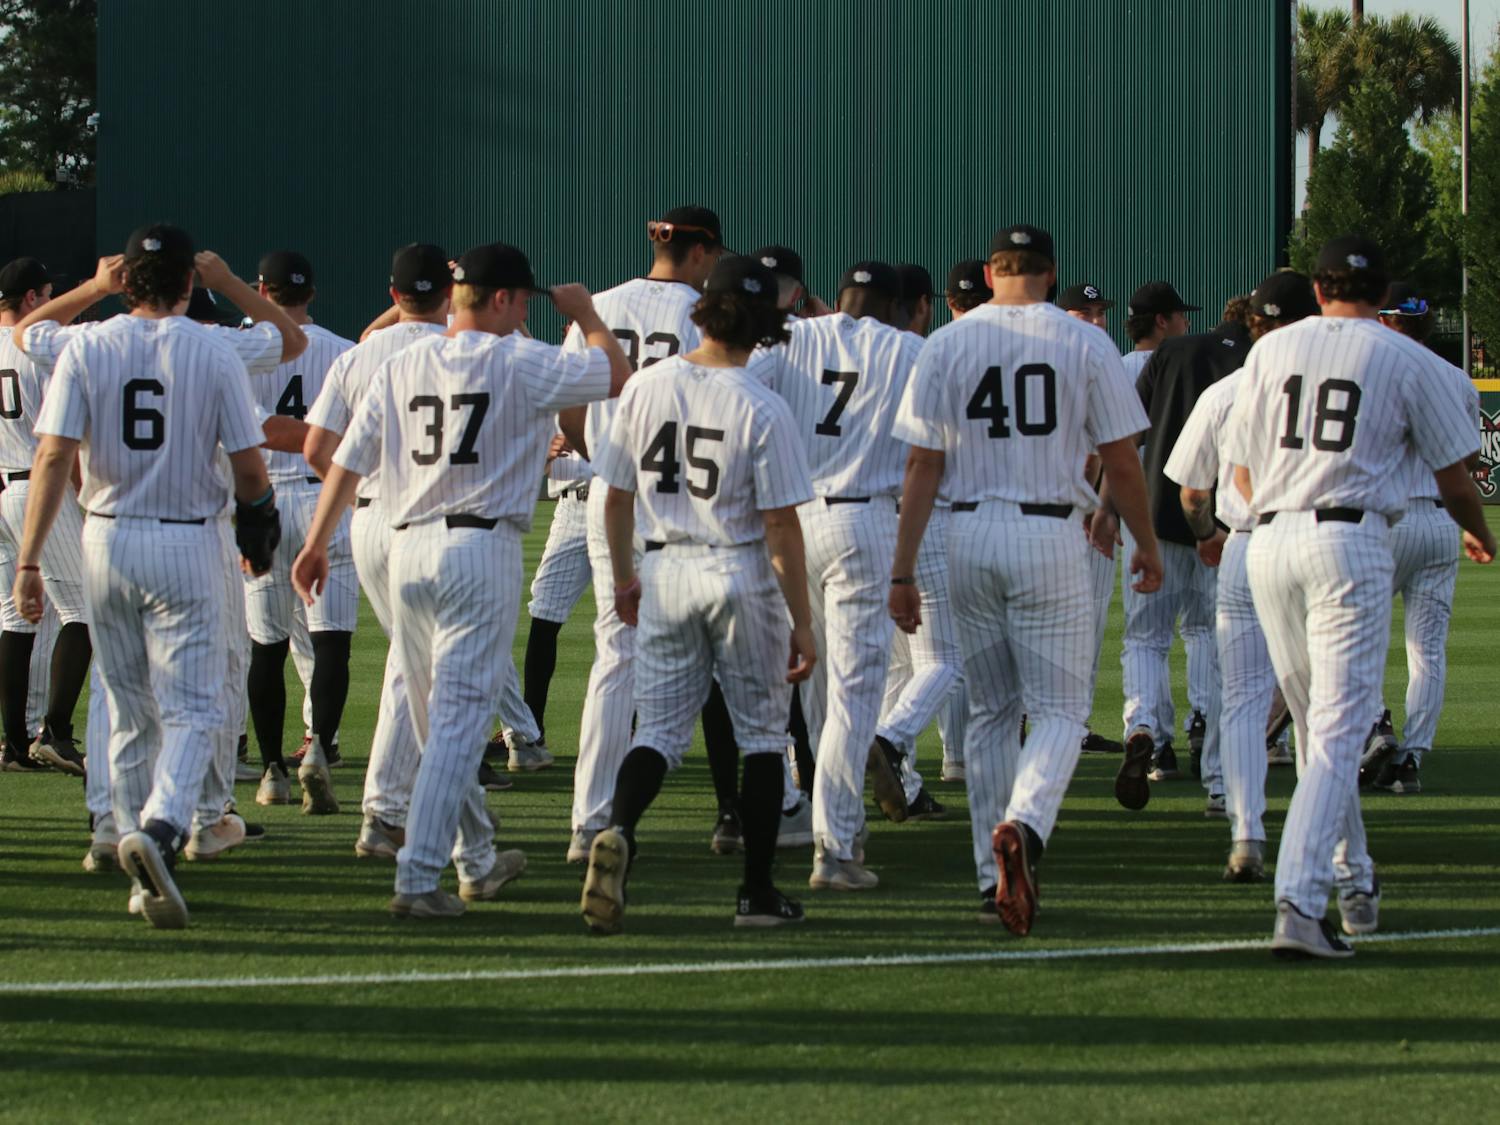 The South Carolina baseball team walks onto the field at Founders Park before facing Florida. The Gamecocks secured the series with its win on April 21, 2023.